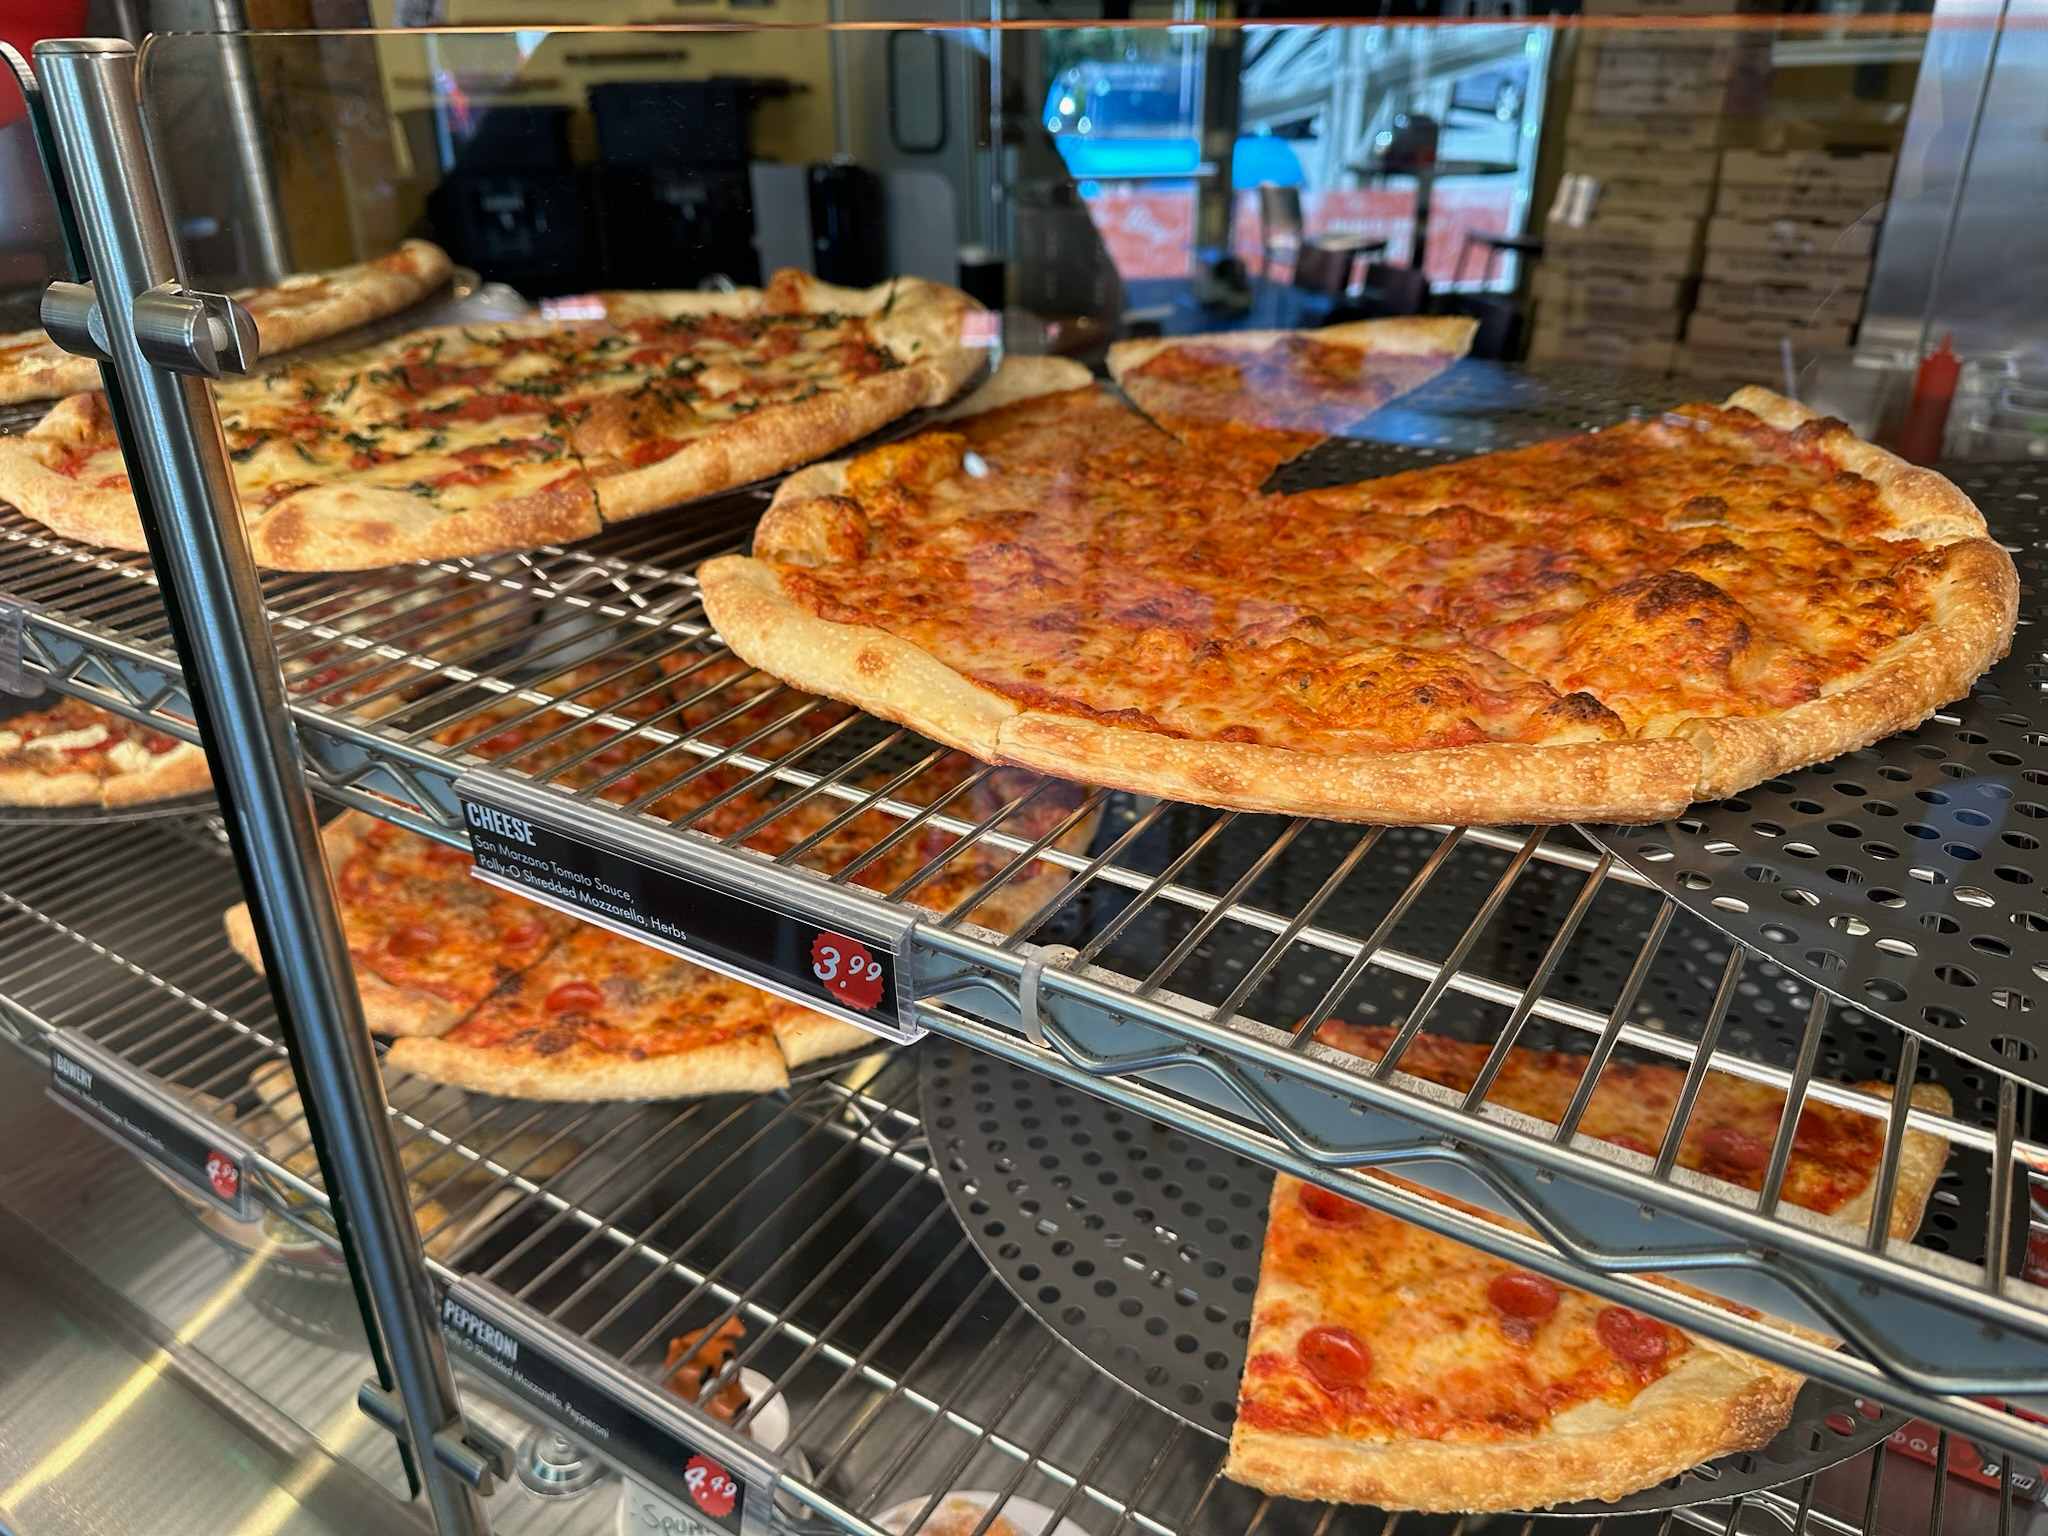 Pizzas on display at Brooklyn Bros Pizzeria